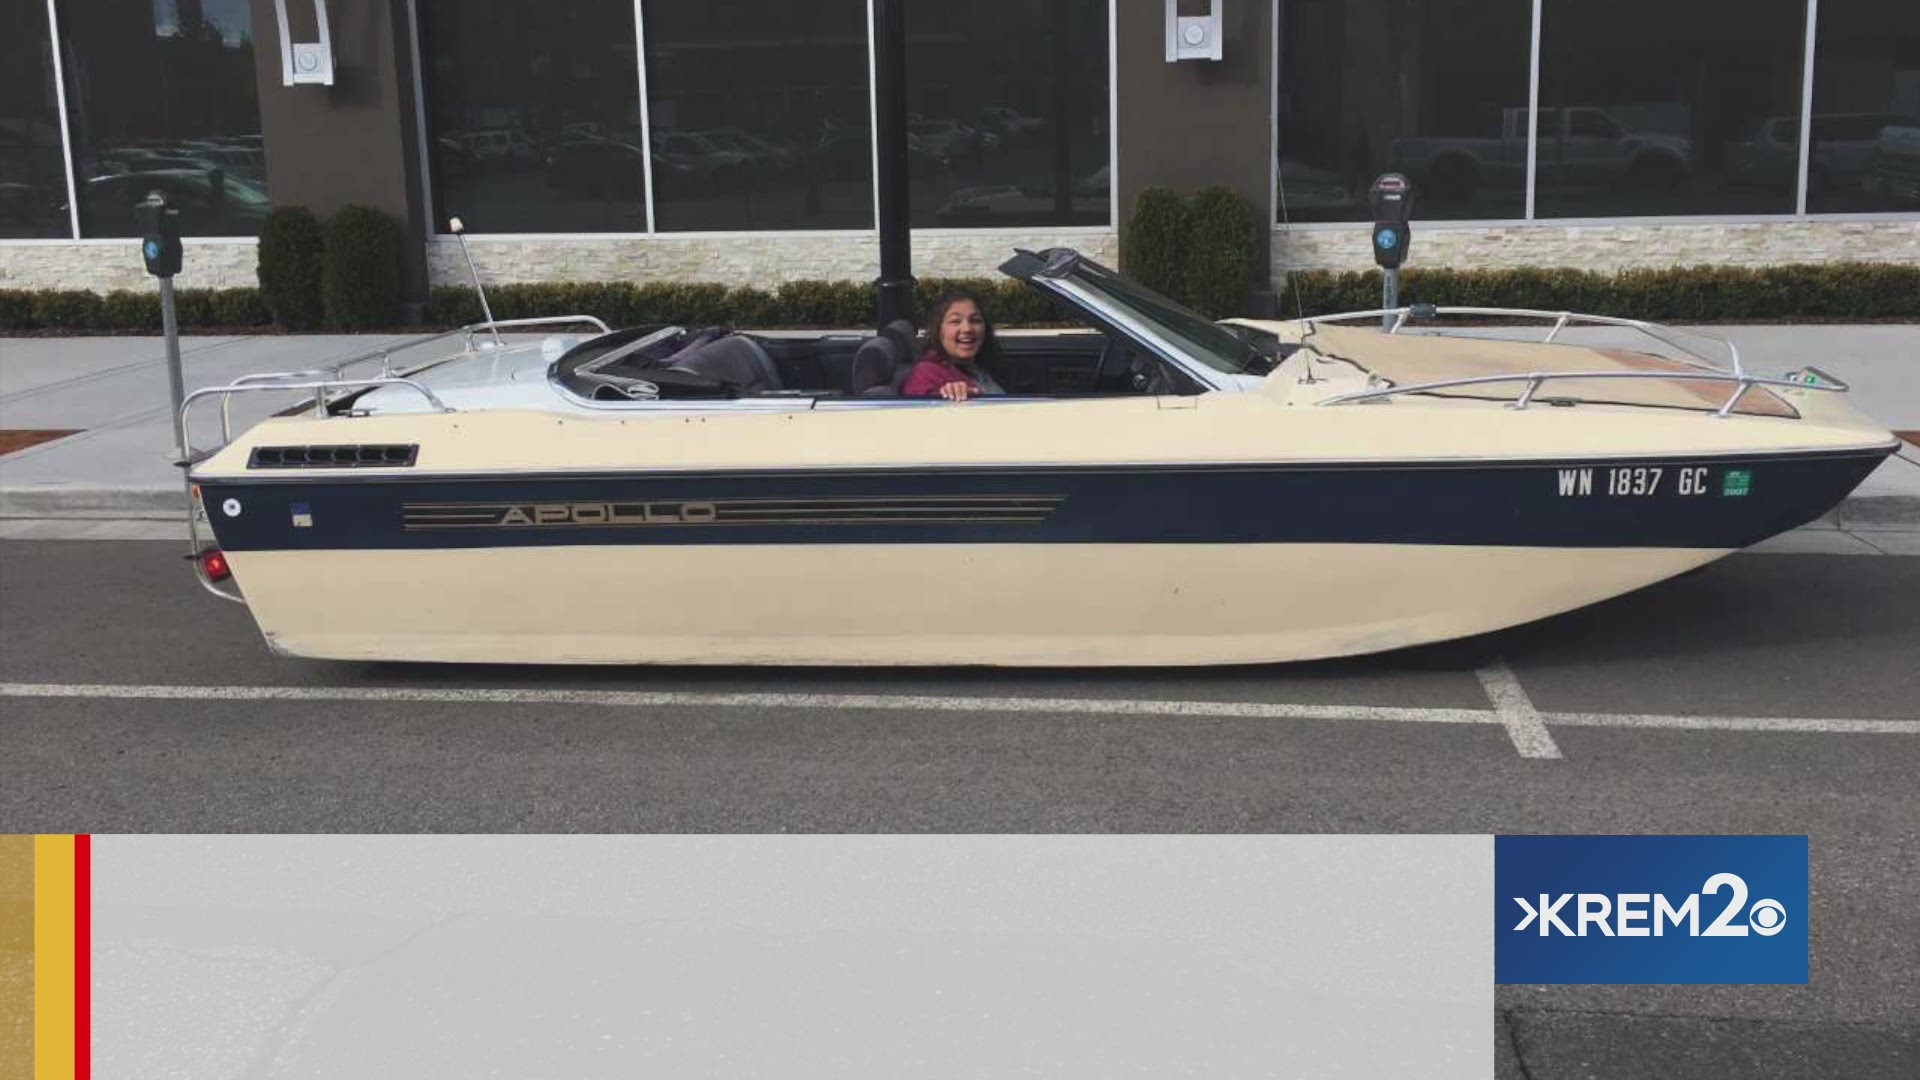 Spokane’s famed boat car turns ten years old this year. Creator and owner Tim Lorentz says he loves his unique ride more than ever.